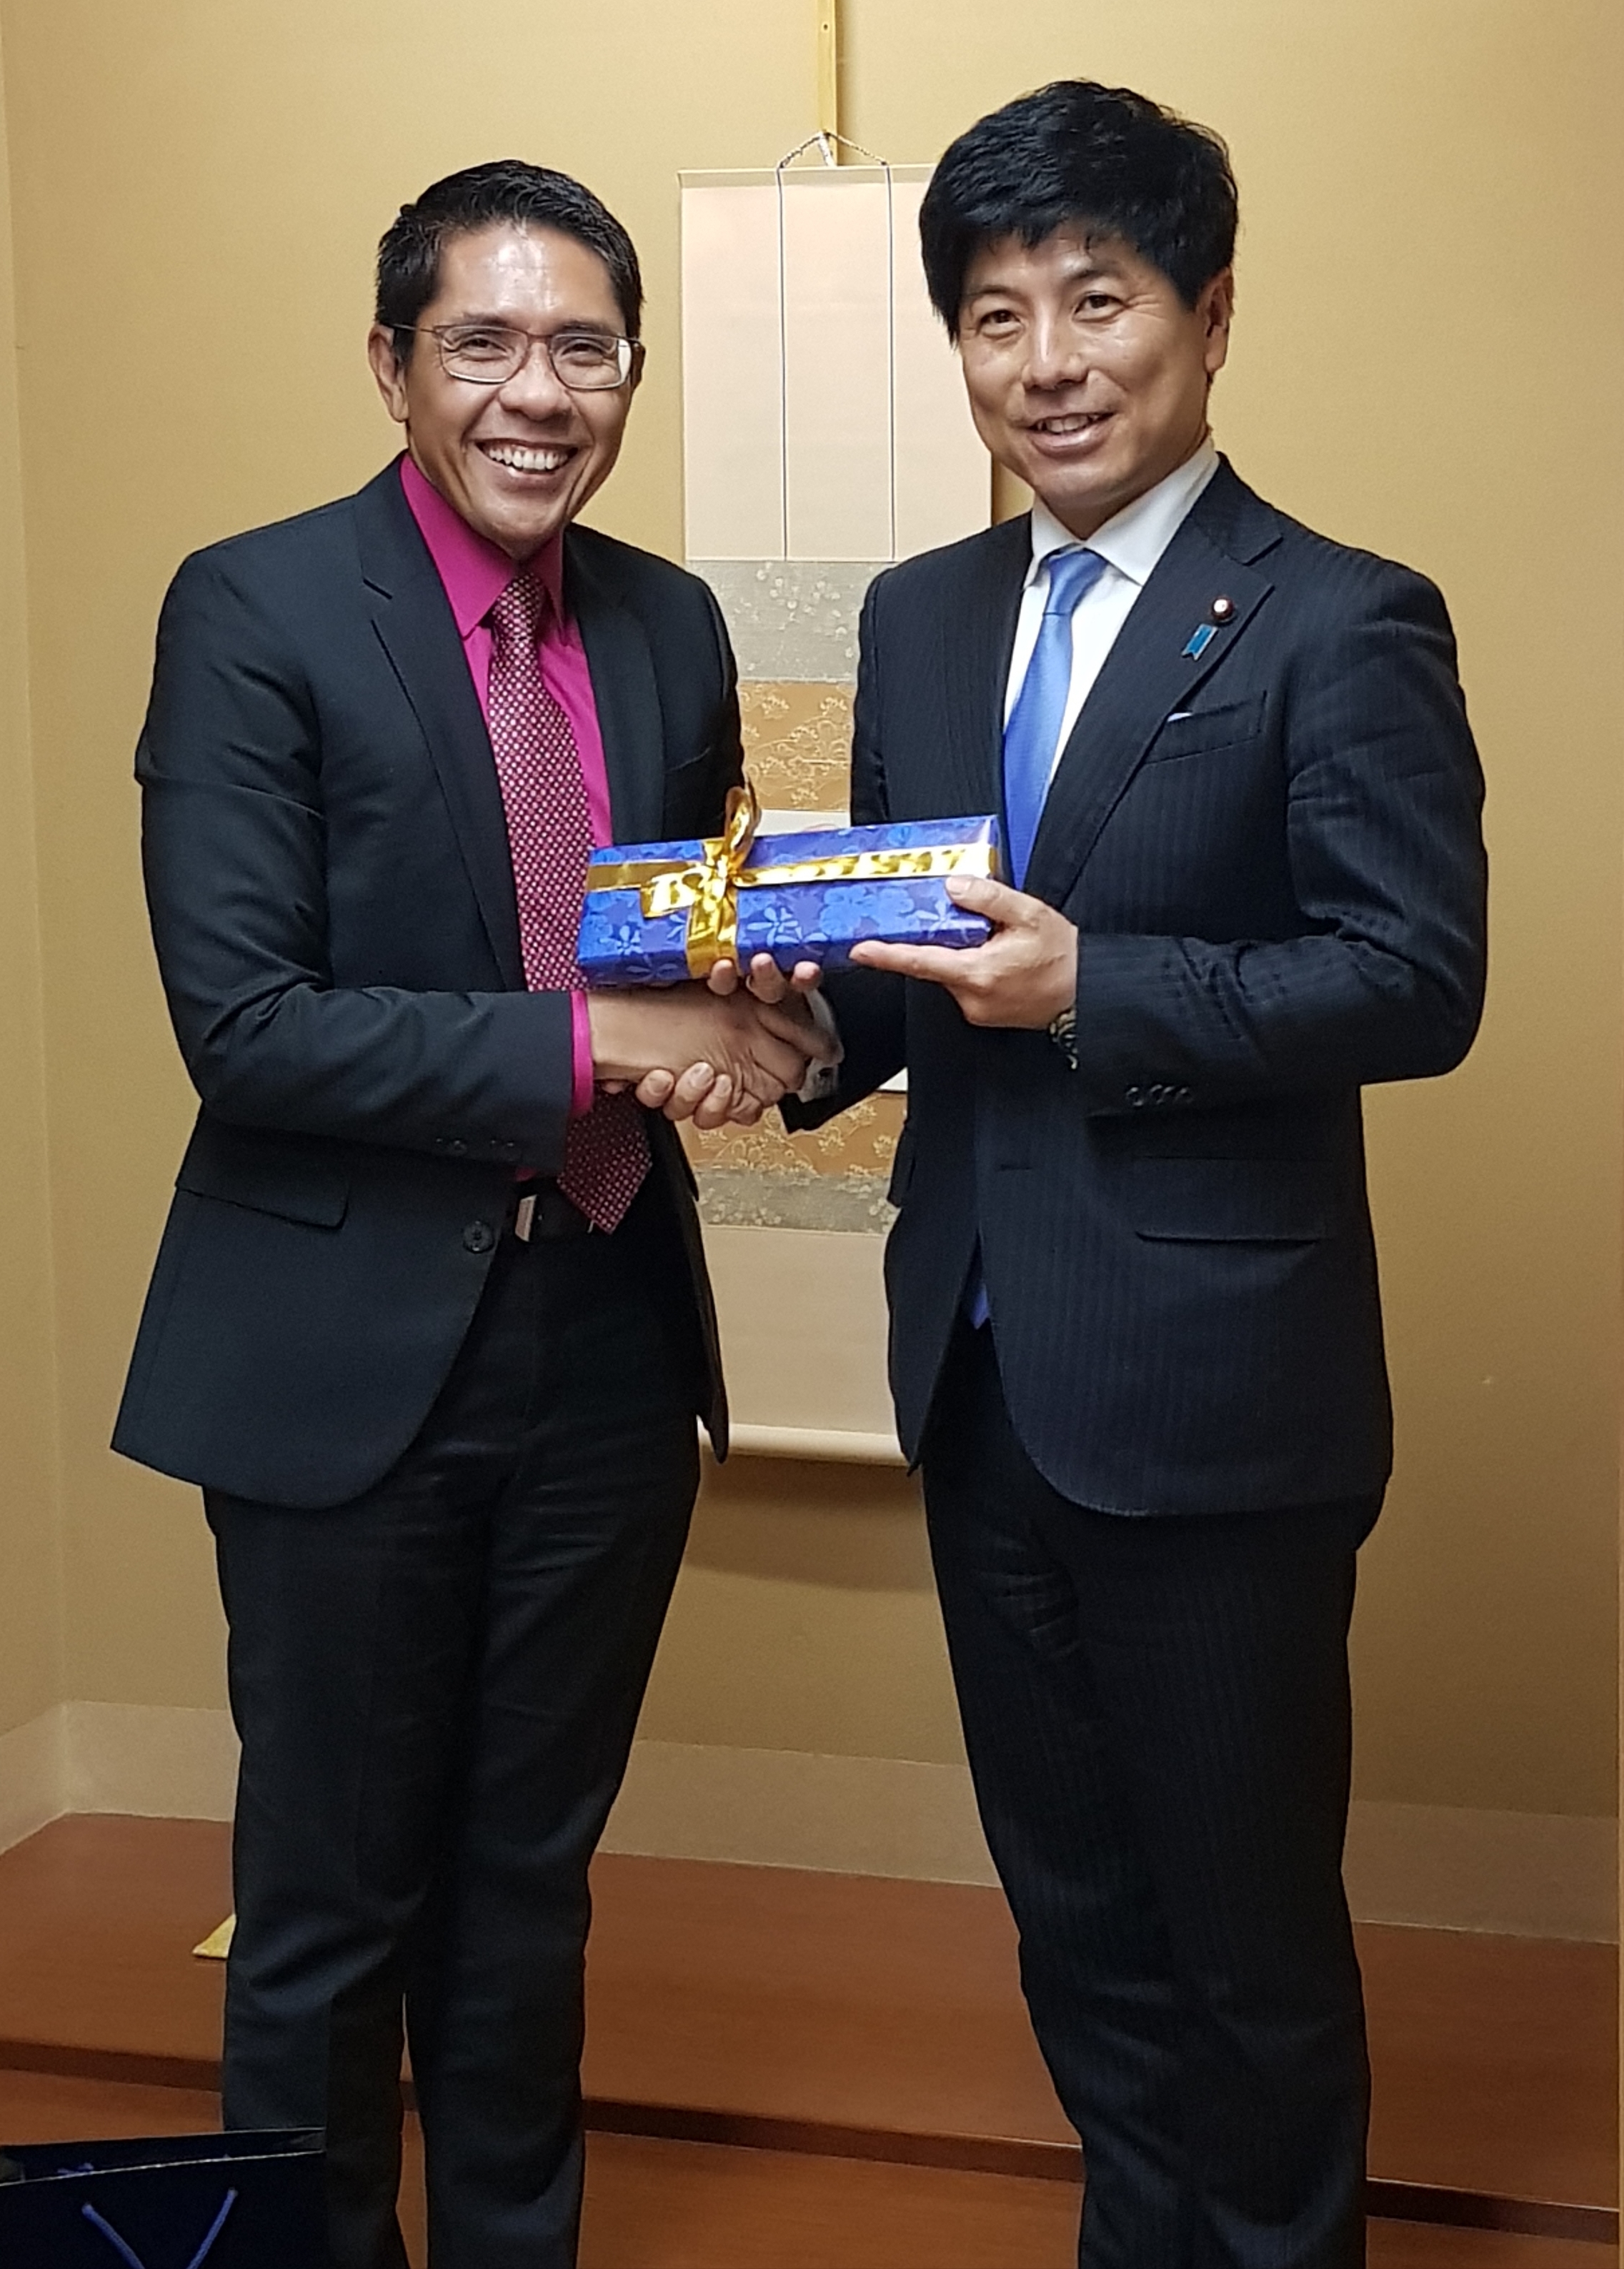 Japanese State Minister for Foreign Affairs Kazuyuki Nakane hosted SMS Maliki to dinner on 8 March 2018